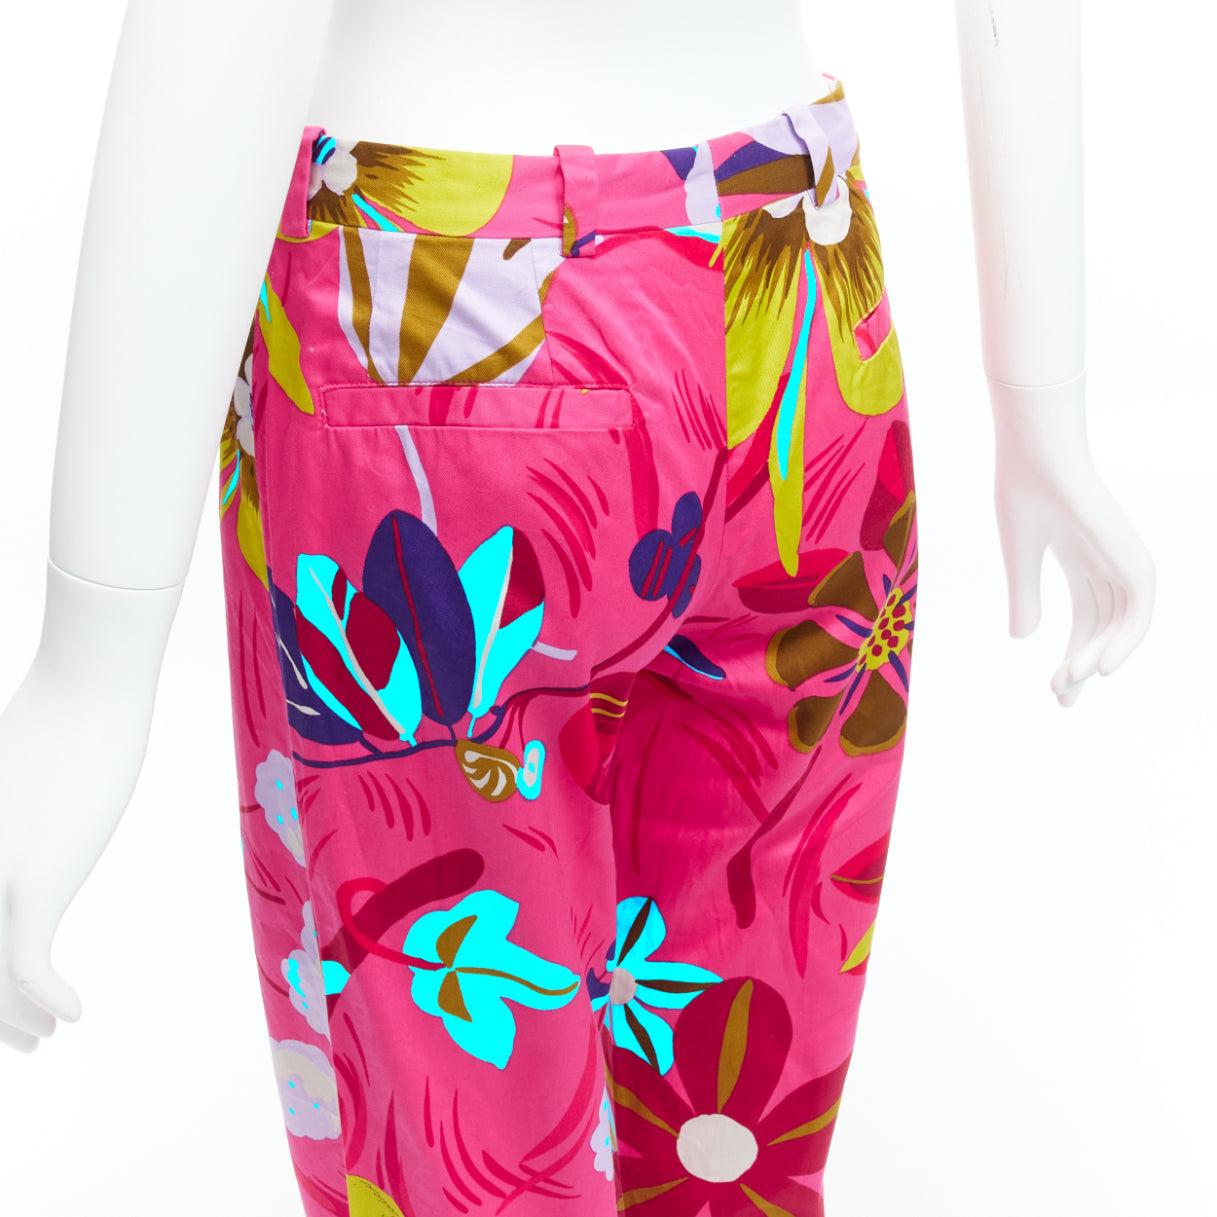 new GUCCI 1999 Tom Ford Vintage pink tropical floral straight pants IT40 S
Reference: TGAS/D00576
Brand: Gucci
Designer: Tom Ford
Collection: SS1999
Material: Cotton
Color: Pink, Multicolour
Pattern: Floral
Closure: Button Fly
Lining: White